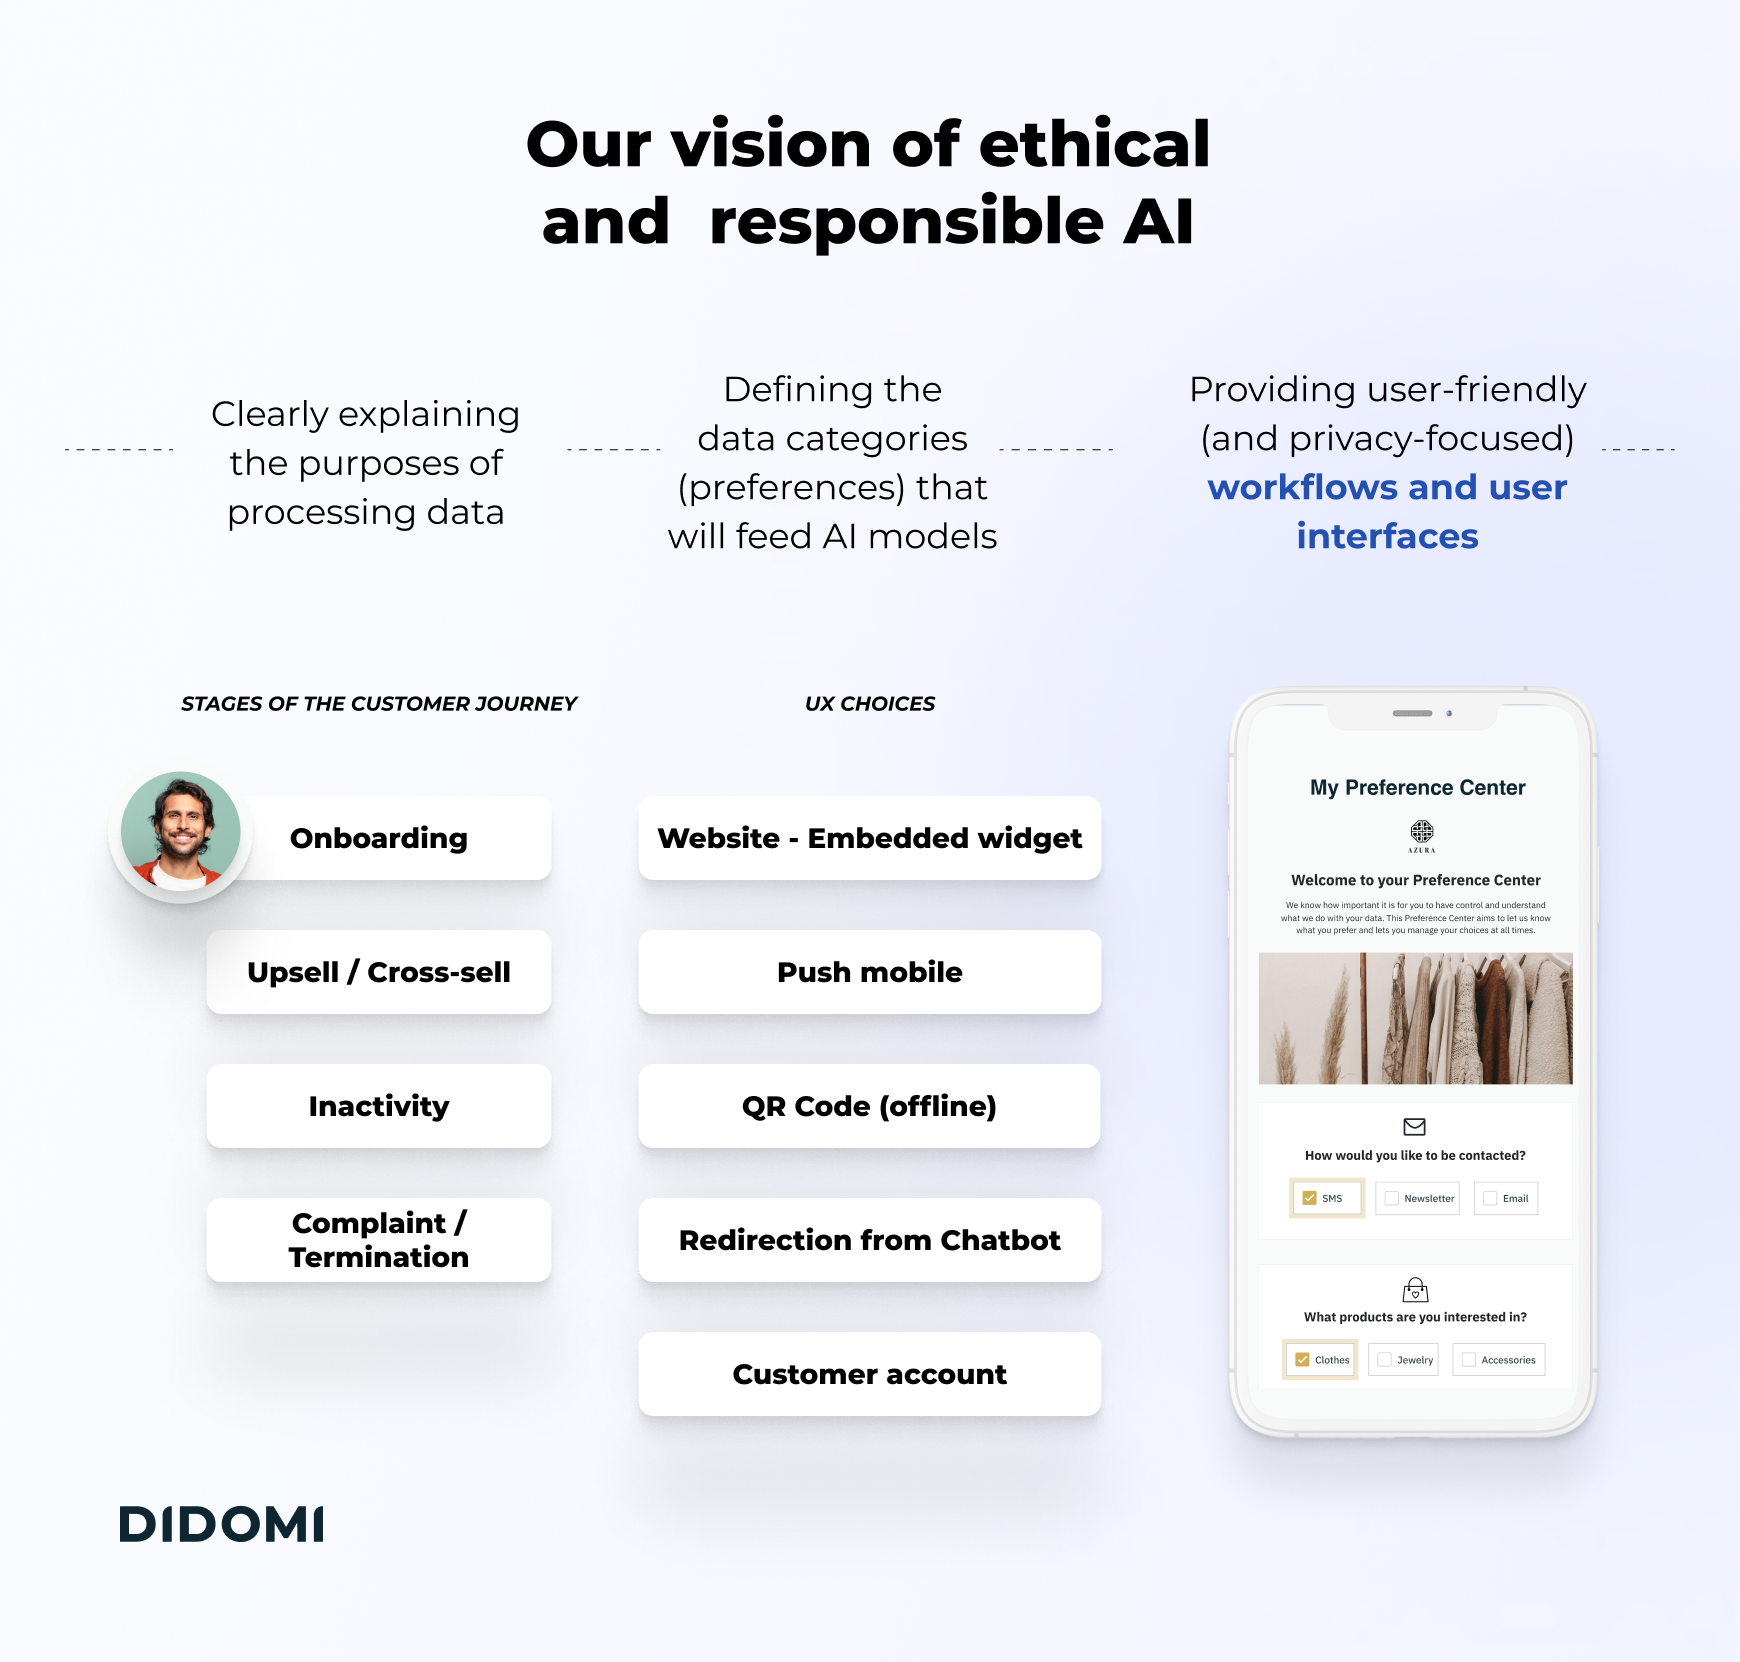 A visual of Didomi's vision of ethical and responsible AI. First, clearly explaining the purposes of processing data, through various stages of the customer journey (onboarding, upsell, inactivity, termination), then, defining the data categories (preferences) that will feed AI models, through UX choices (embedded on the website, through push on mobile, via QR codes, chatbots or a customer account. Finally, providing user-friendly (and privacy-focused) workflows and user interfaces, with a mockup of Didomi's preference center to illustrate that